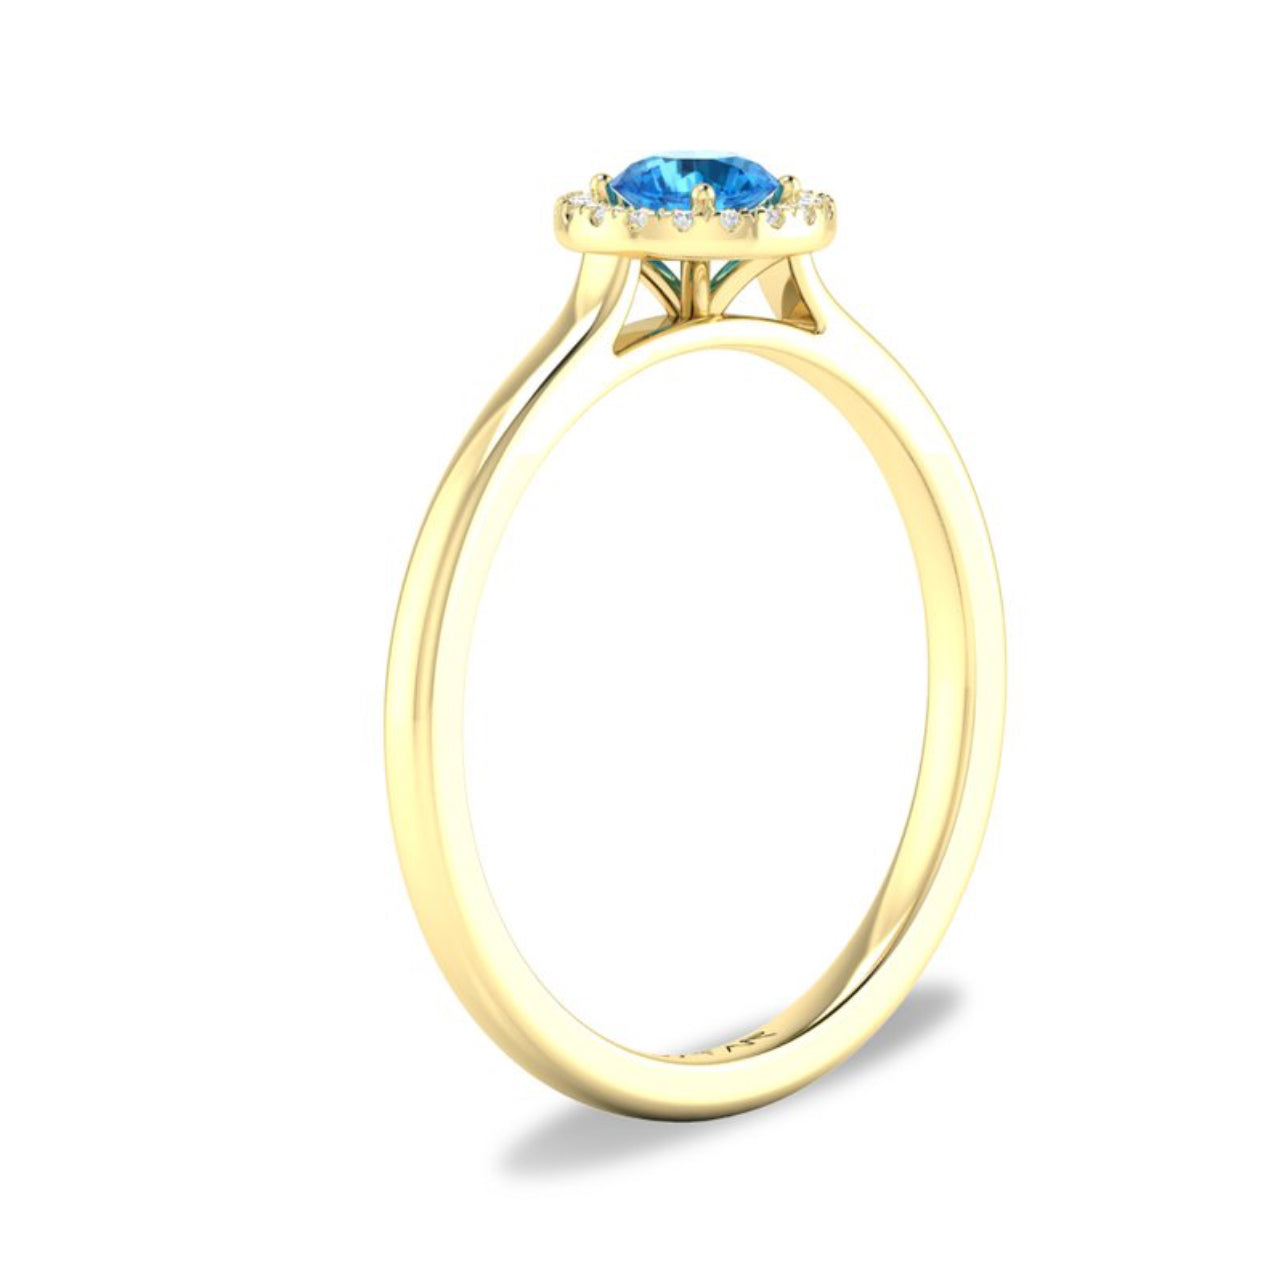 10K White or Yellow Gold Blue Topaz and Diamond Halo Ring